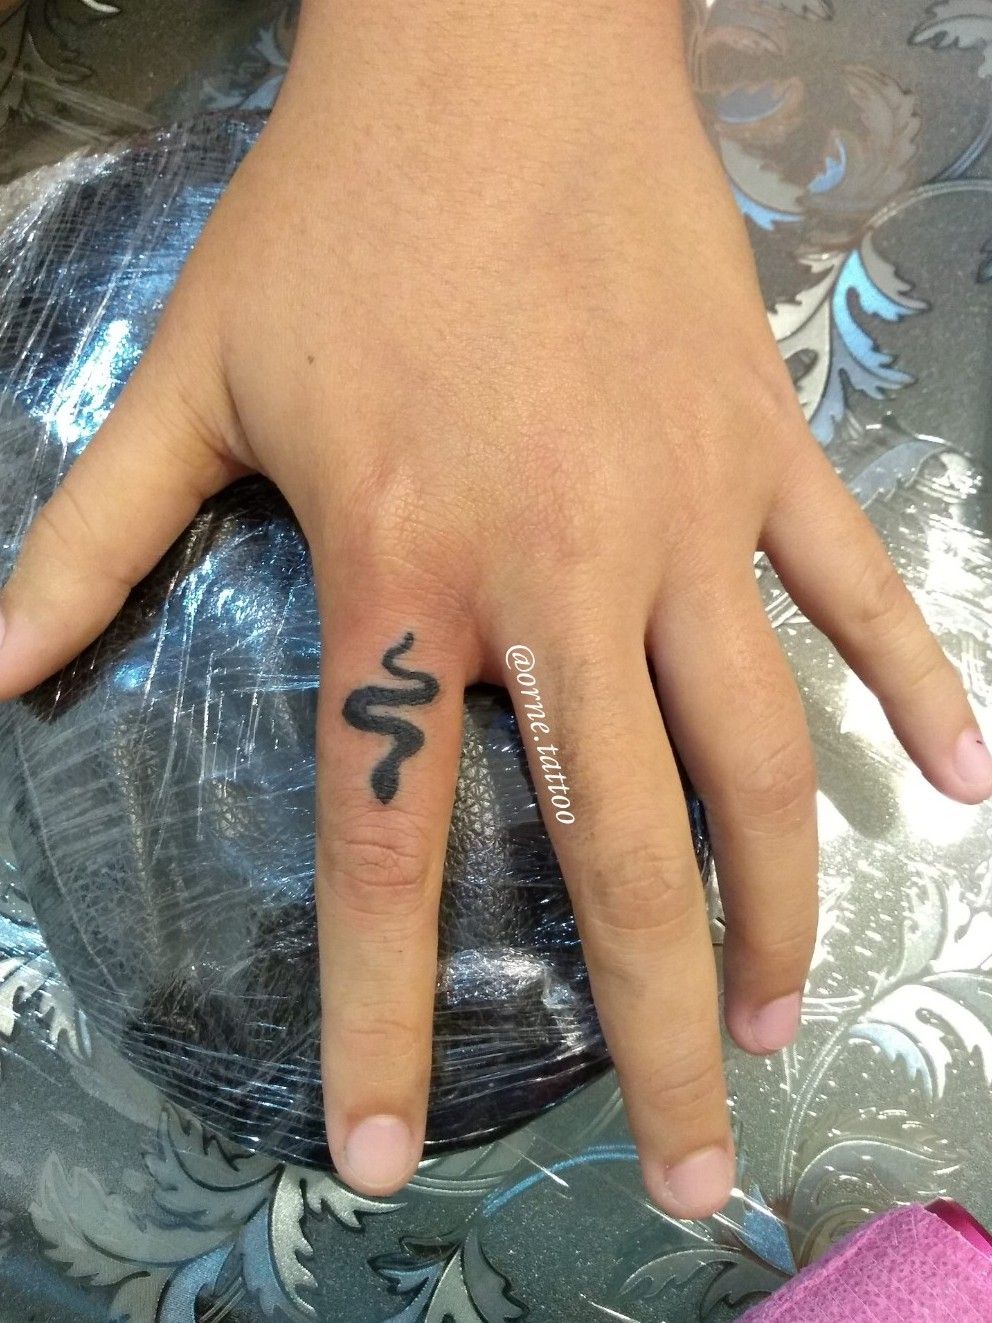 I got a tattoo of a snake on my finger  people keep comparing it to  something rude  The US Sun